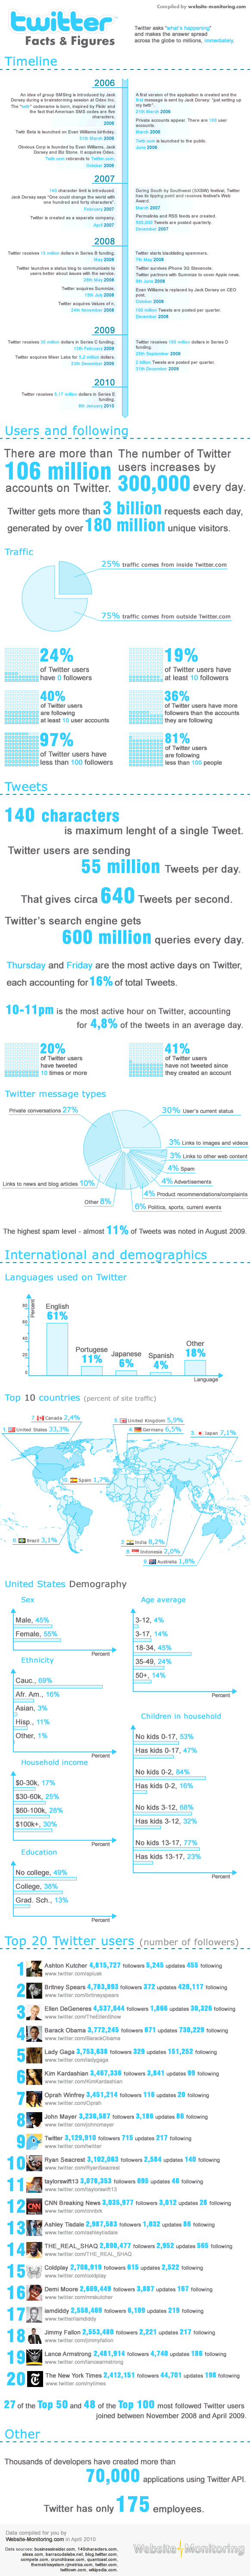 Twitter : Stats & Facts (Infographic)